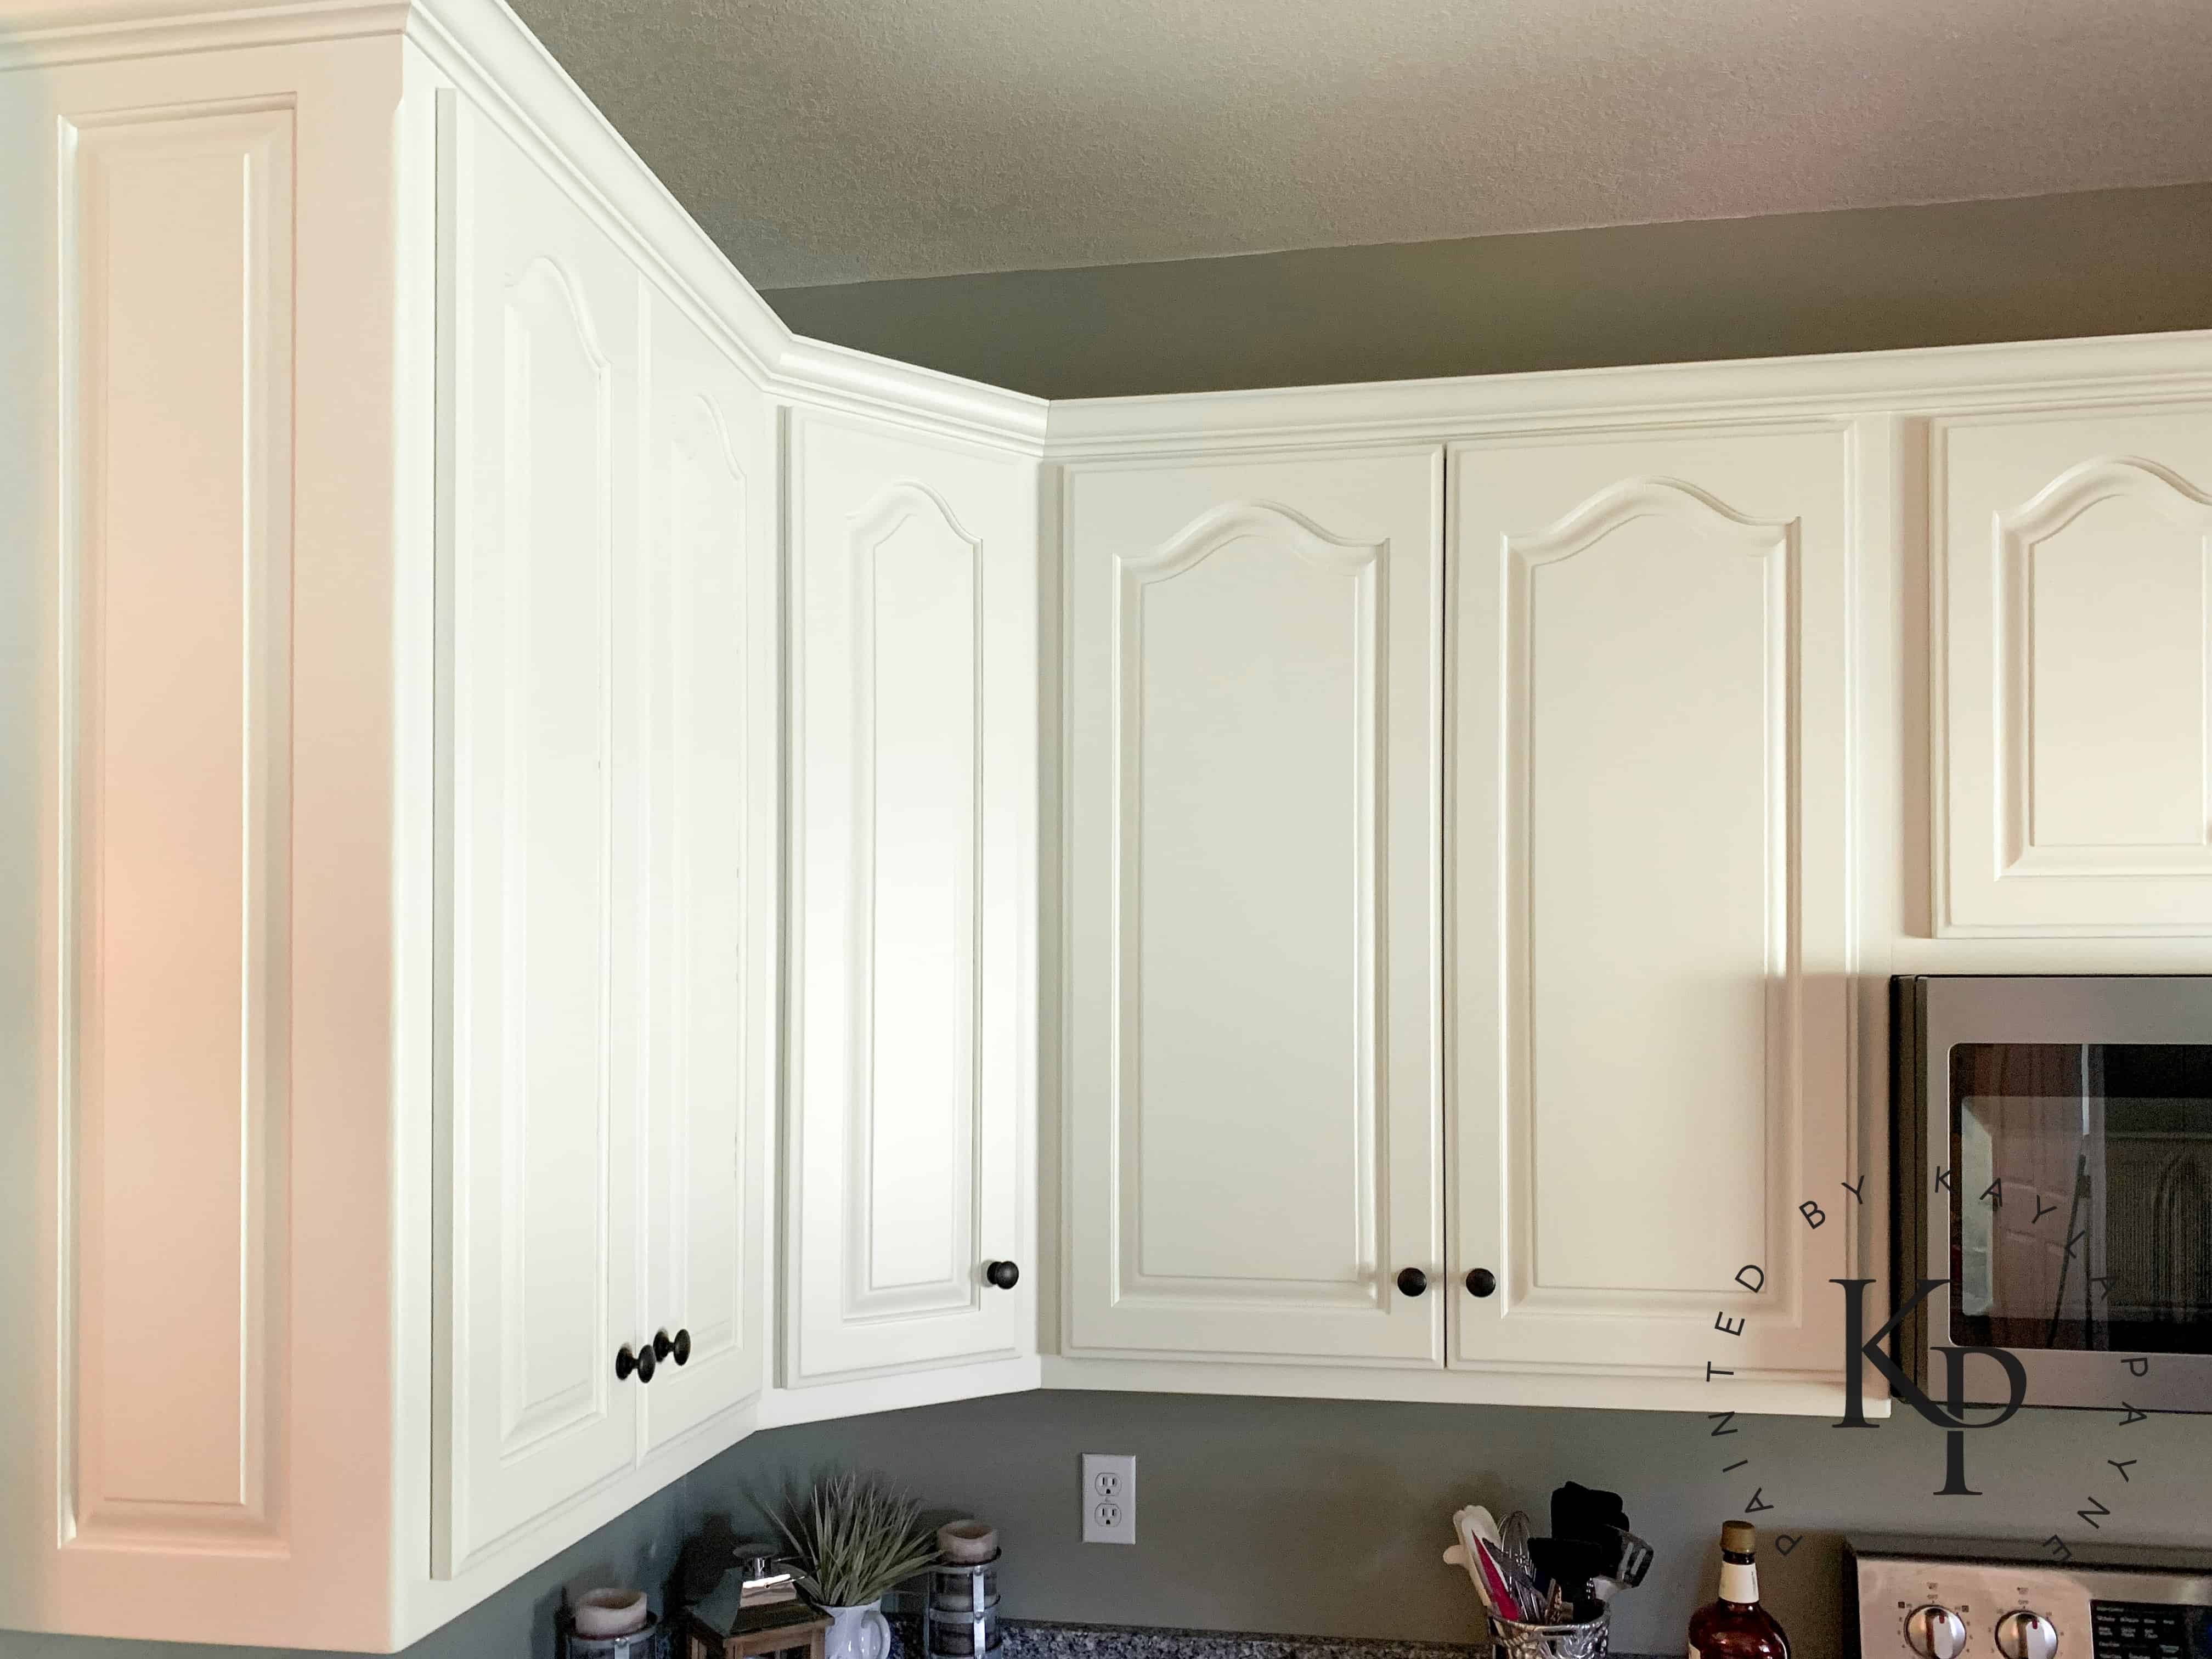 After photo of painted oak kitchen cabinets in Benjamin Moore Soft Chamois